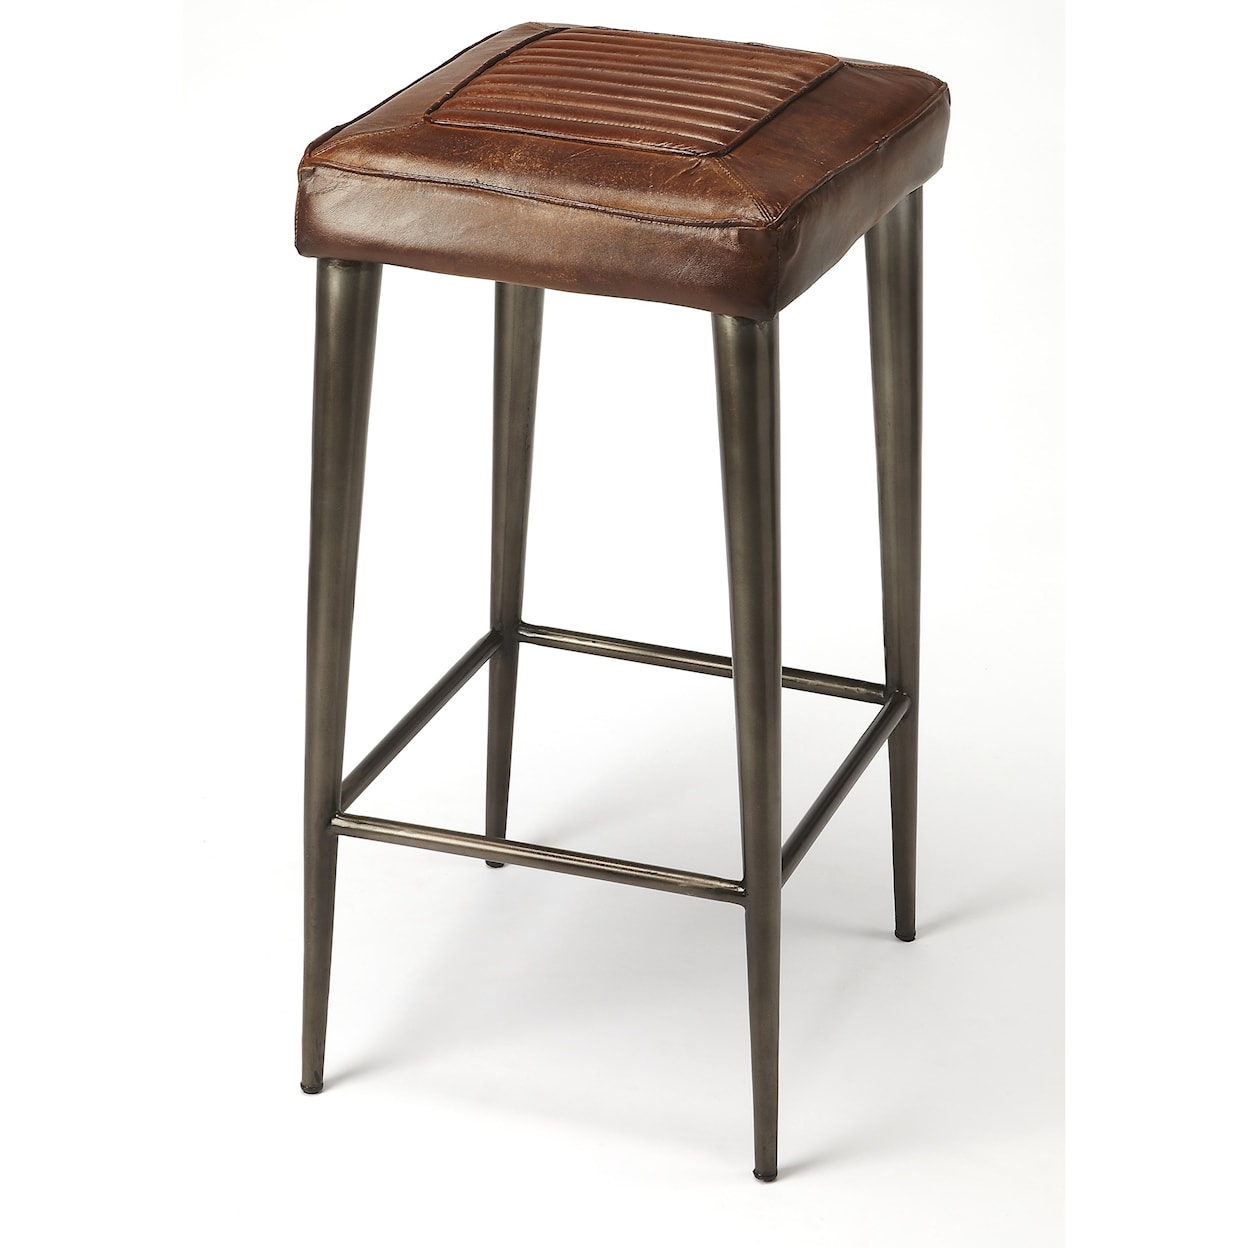 Butler Specialty Company Industrial Chic Bar Stool